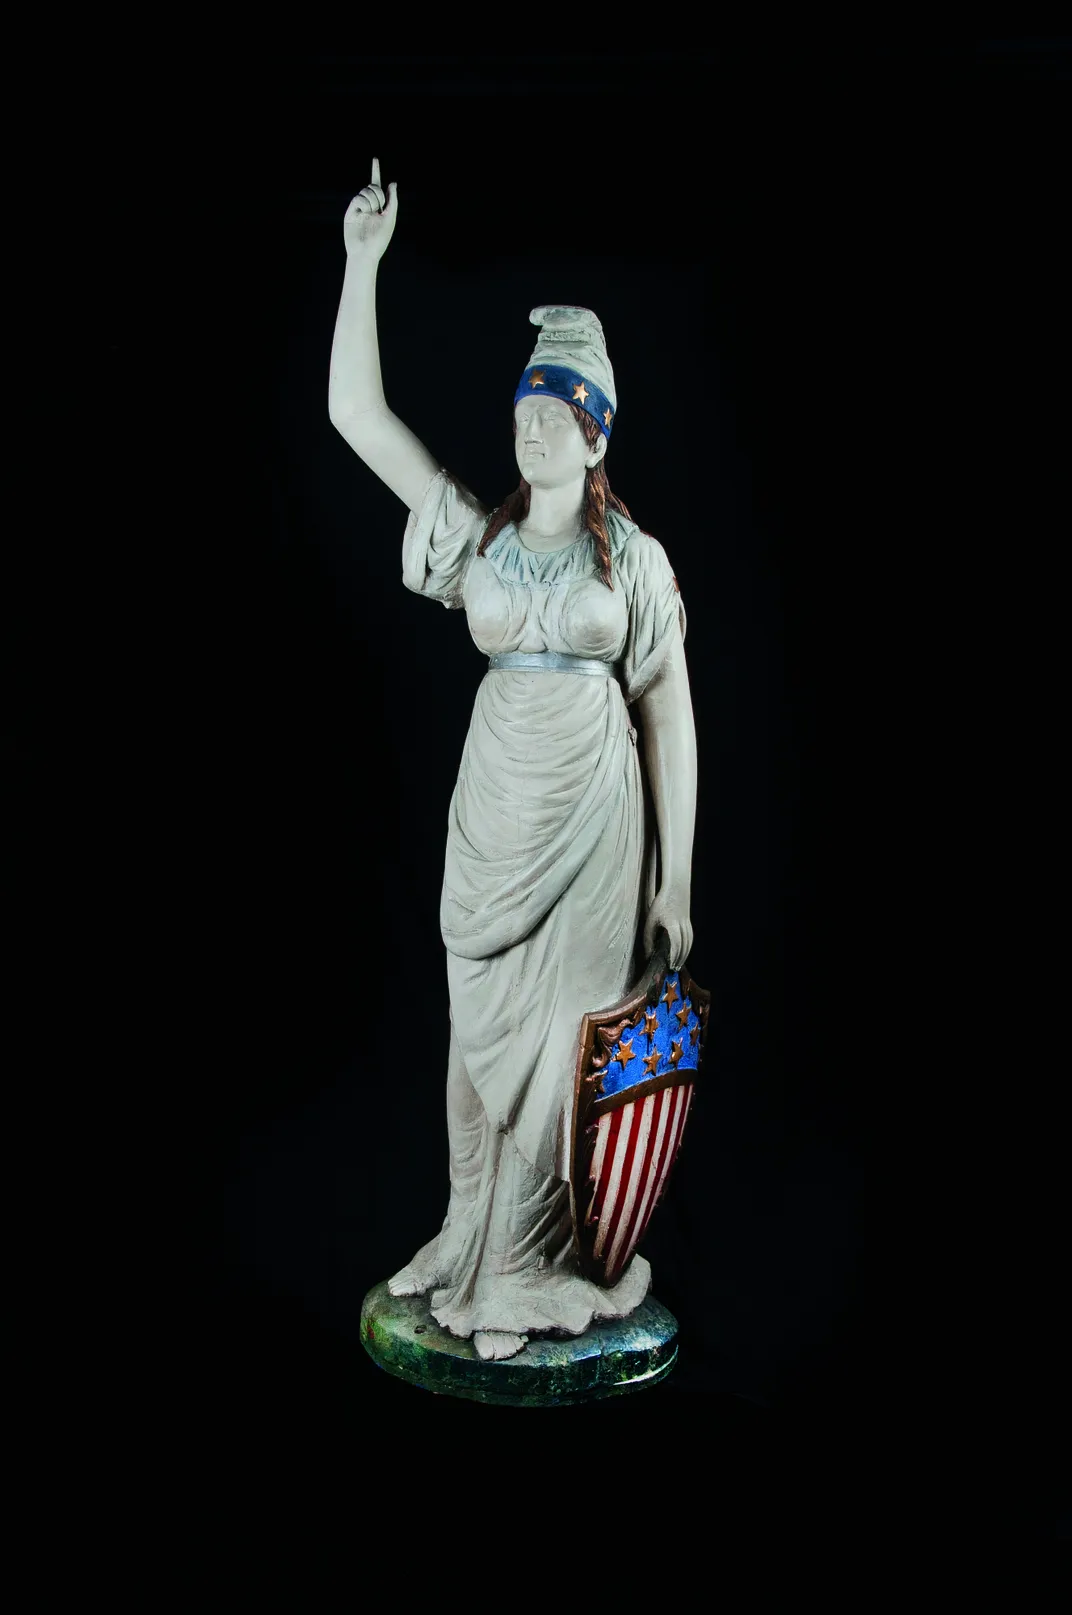 six-foot-plus Lady Columbia carved in wood.